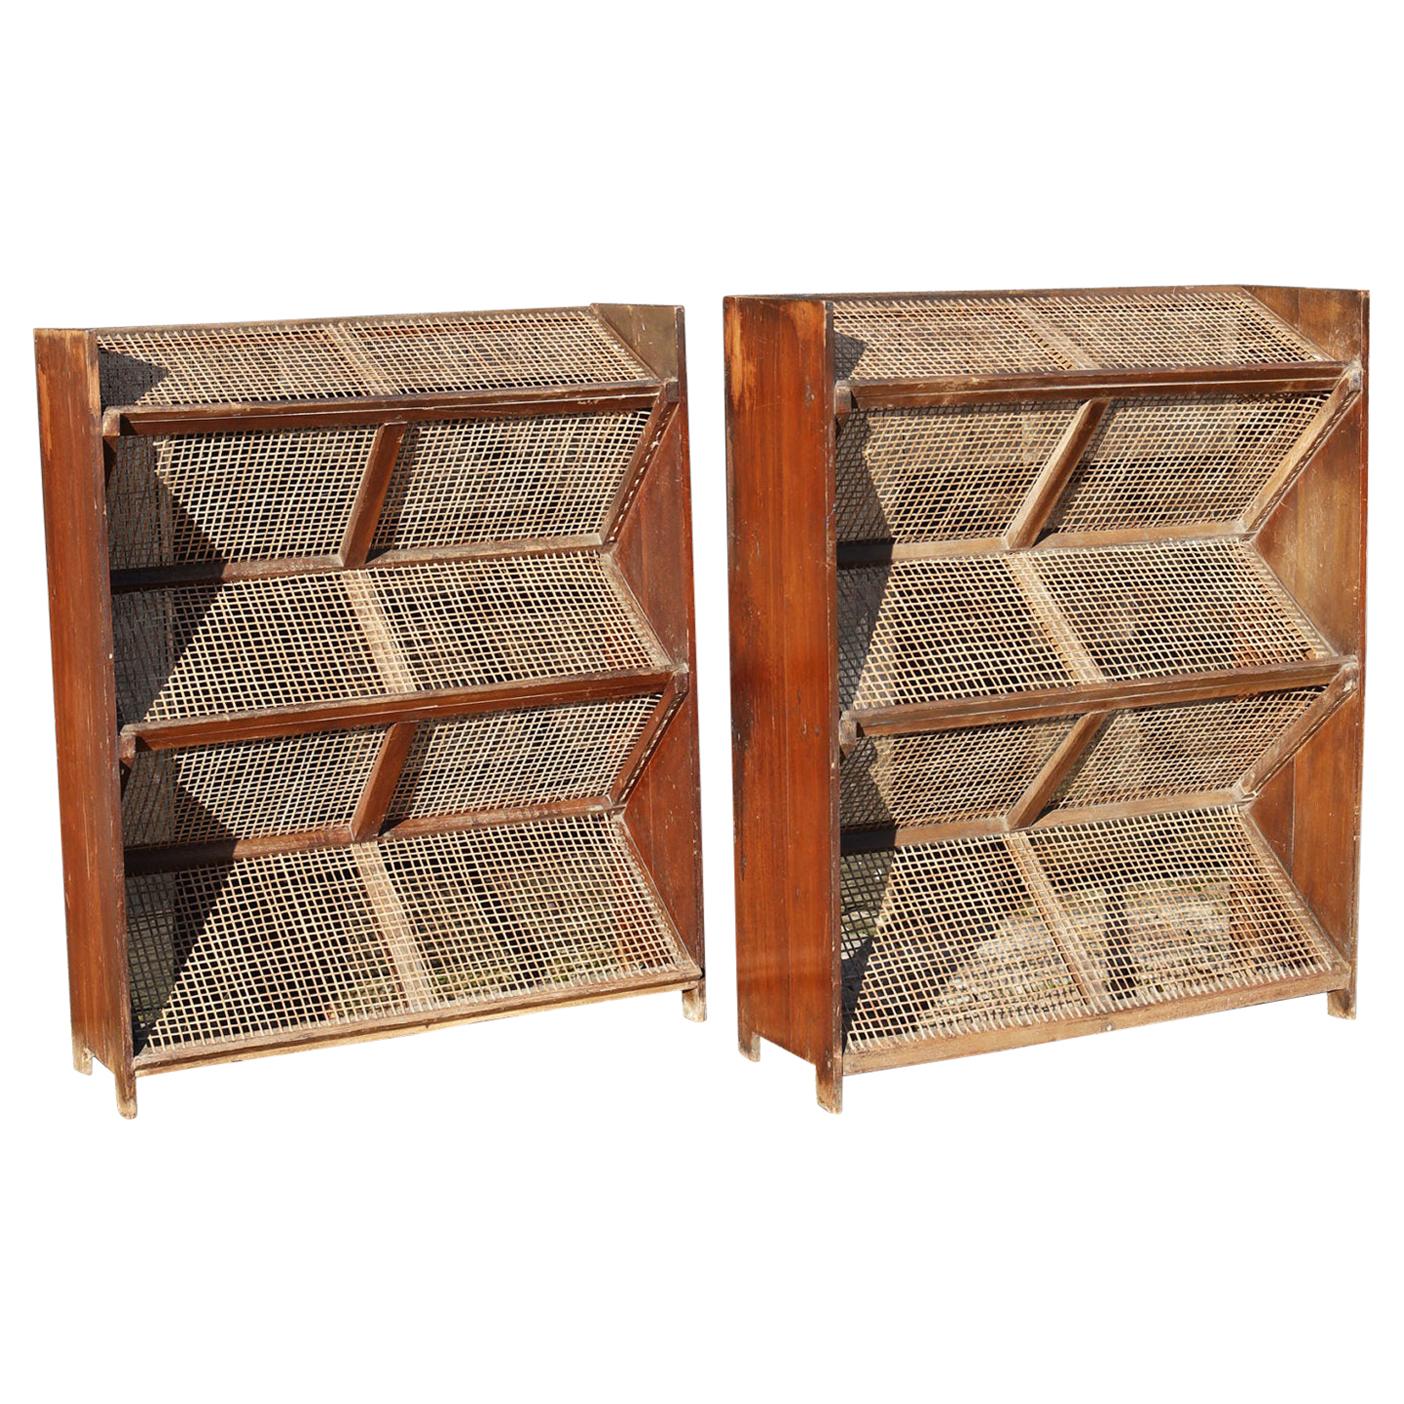 Pair of Teak and Cane Magazine Racks by Pierre Jeanneret for Chandigarh, India